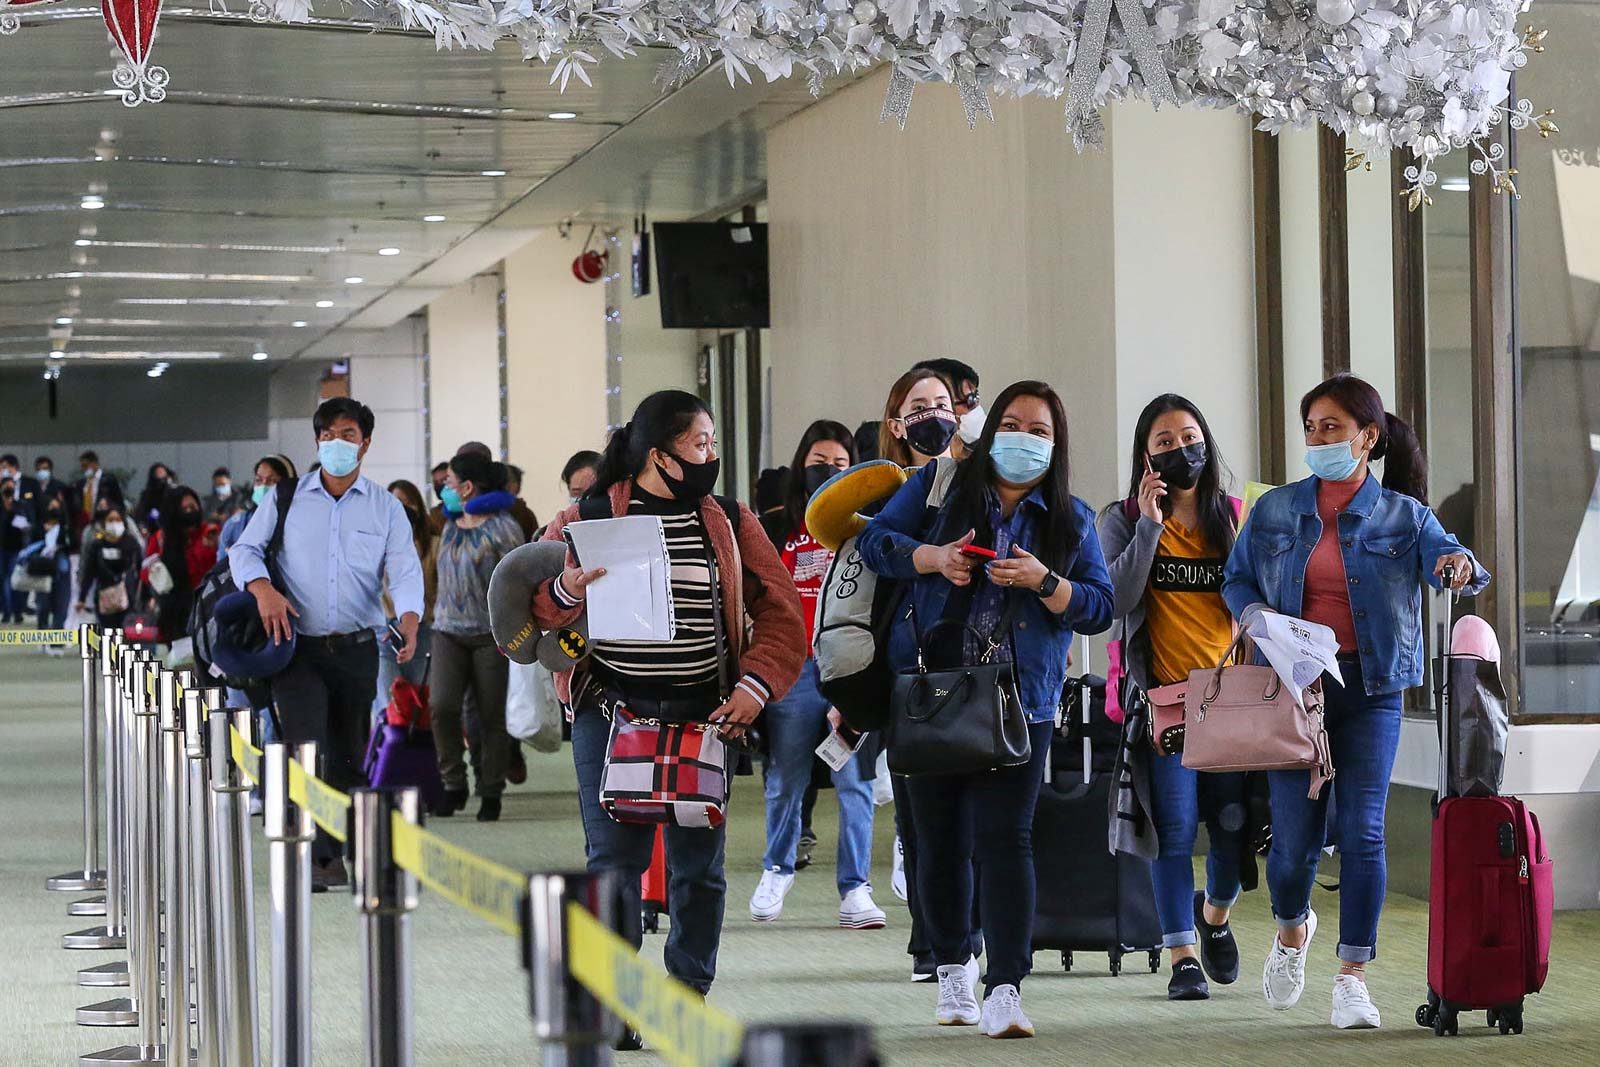 OFWs want to be wiser with money, but finlit programs aren’t reaching them